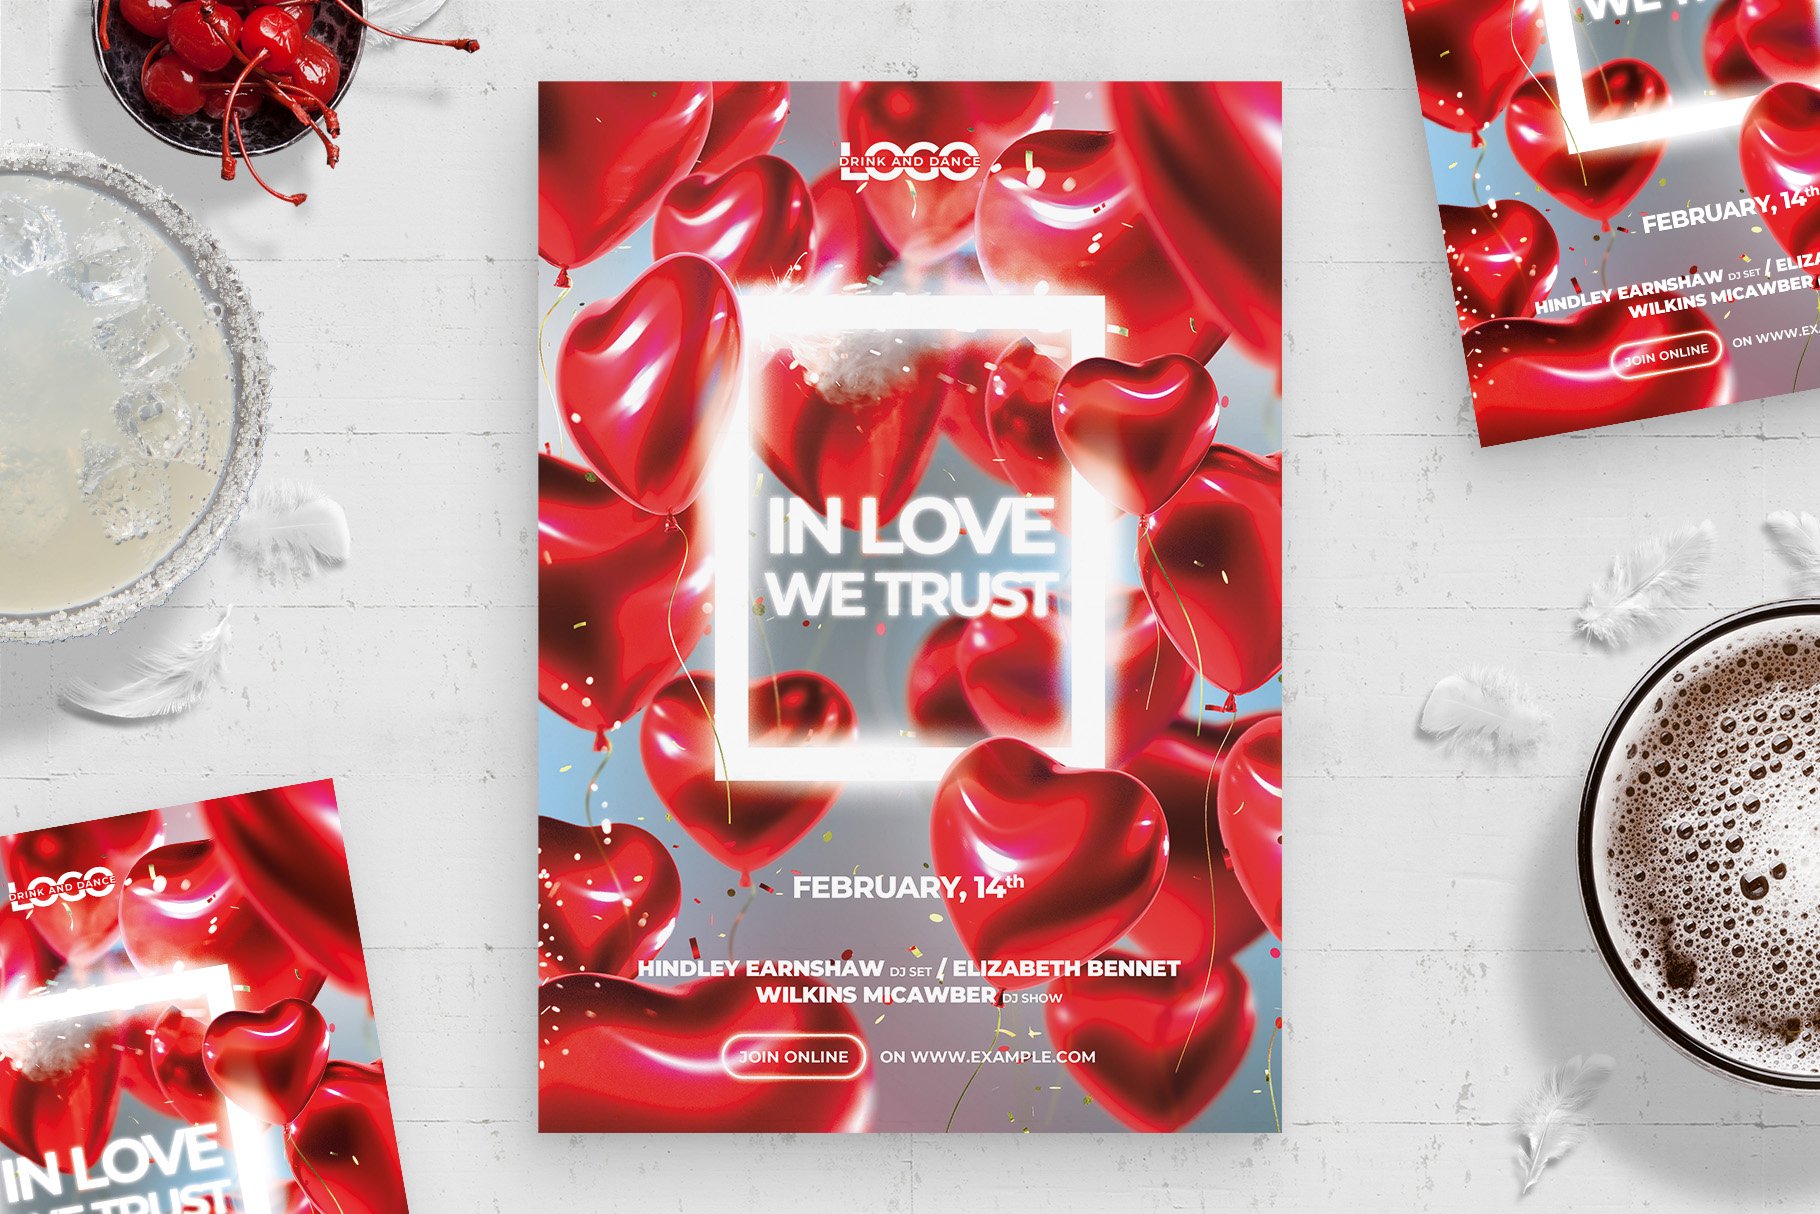 Valentines Flyer Template cover image.